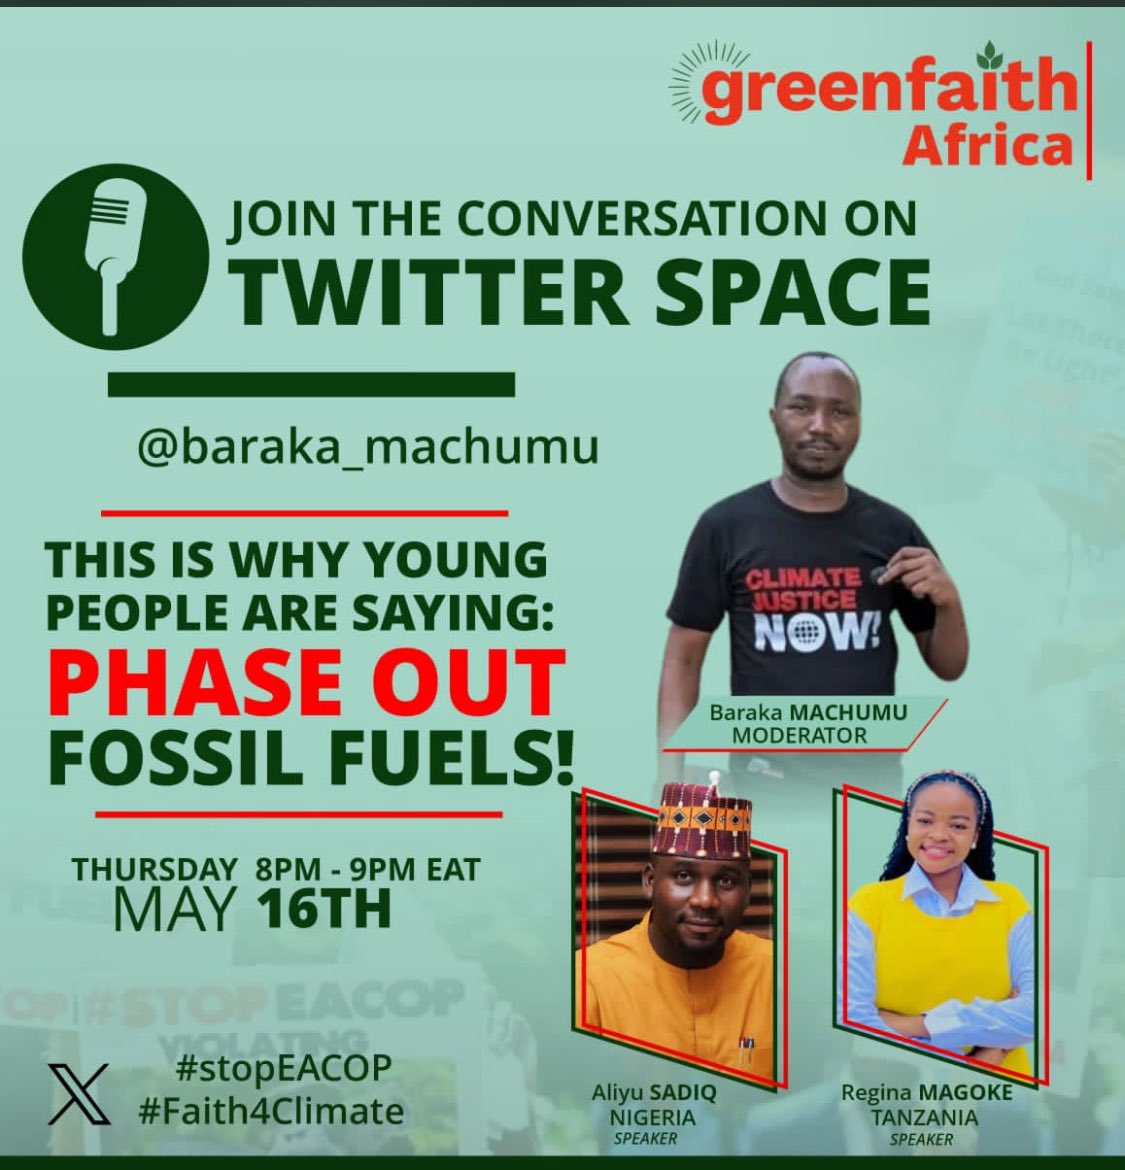 I will be listening to the much needed conversation on why Young people are saying : Phase Out Fossil Fuels on @baraka_machumu’s twitter space. Do well to join us and add your thoughts. #Faiths4Climate #StopEACOP @GreenFaith_Afr Time: 8PM EAT( 5 PM GMT)